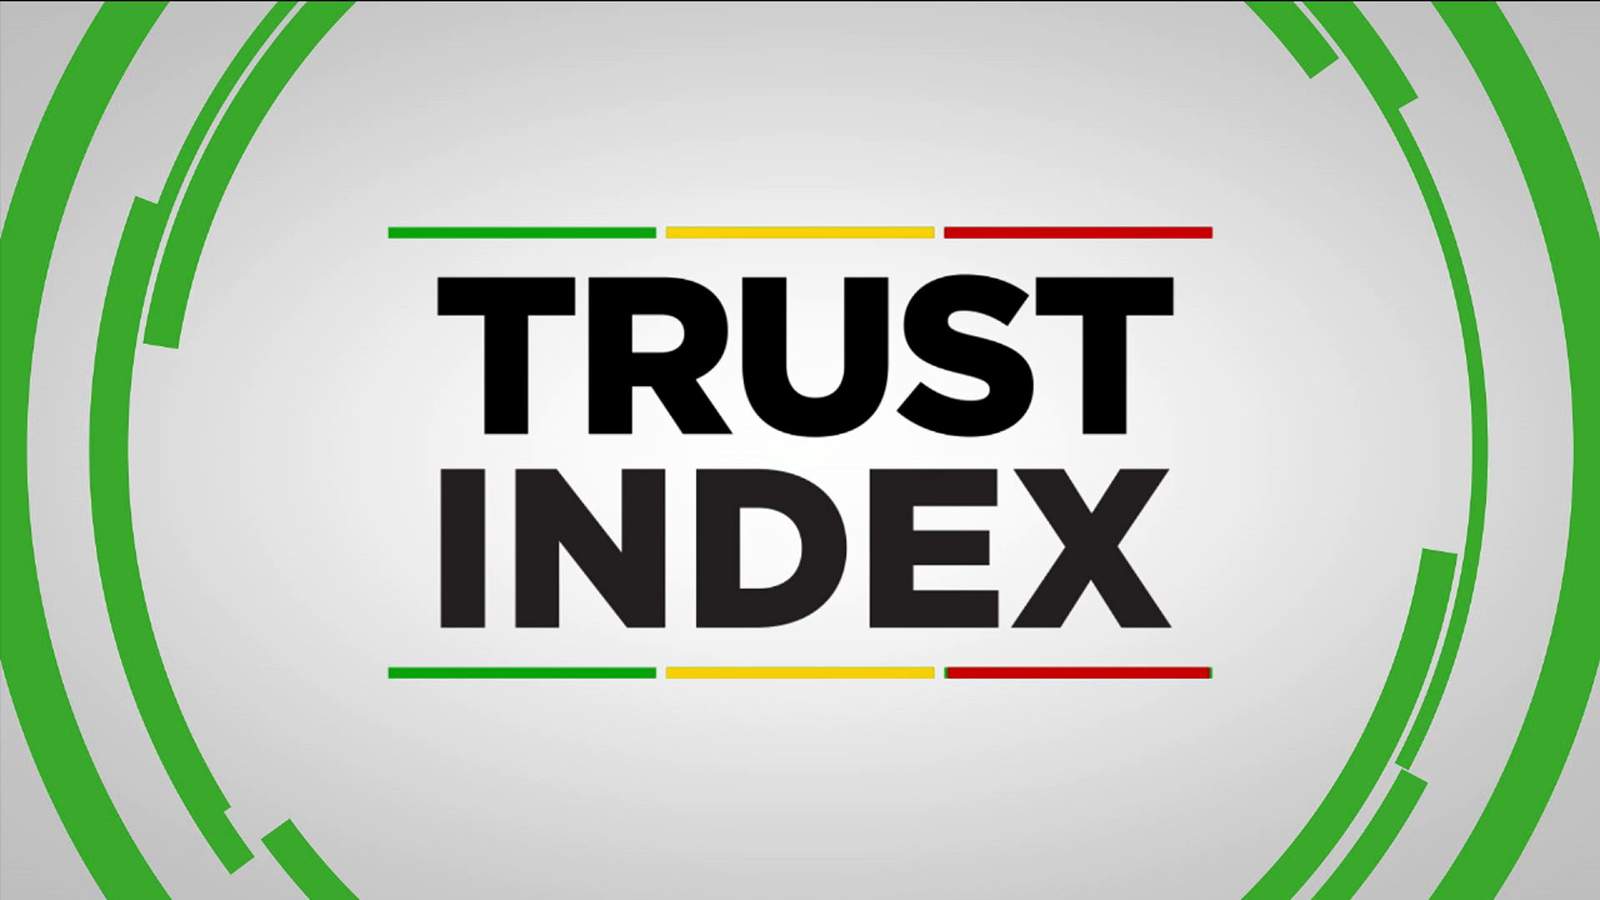 Trust Index: The biggest claims we fact-checked in 2020